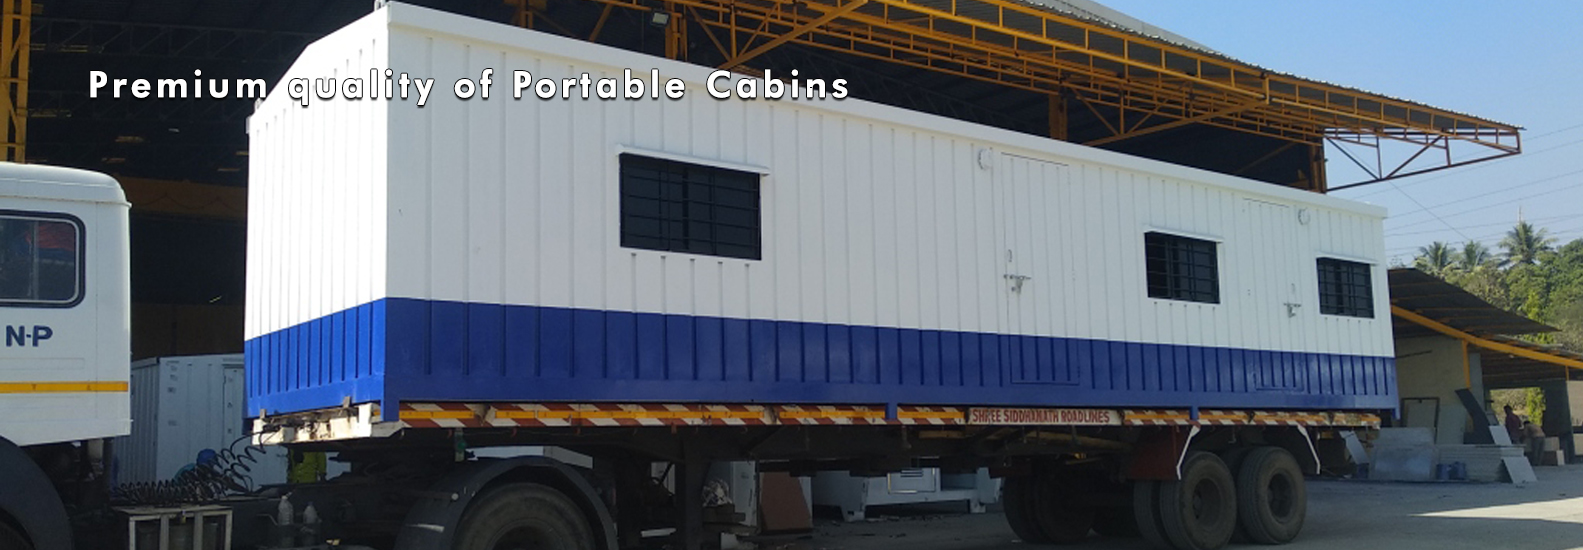 portable cabins, portable cabin manufacturer mumbai, portable cabin, porta cabin manufacturer india, portable office cabins , prefabricated portable cabins, porta cabins, portable offices, portable office cabin, portable living accommodation mumbai, portable living room, portable toilets manufacturer in Mumbai, mobile toilets